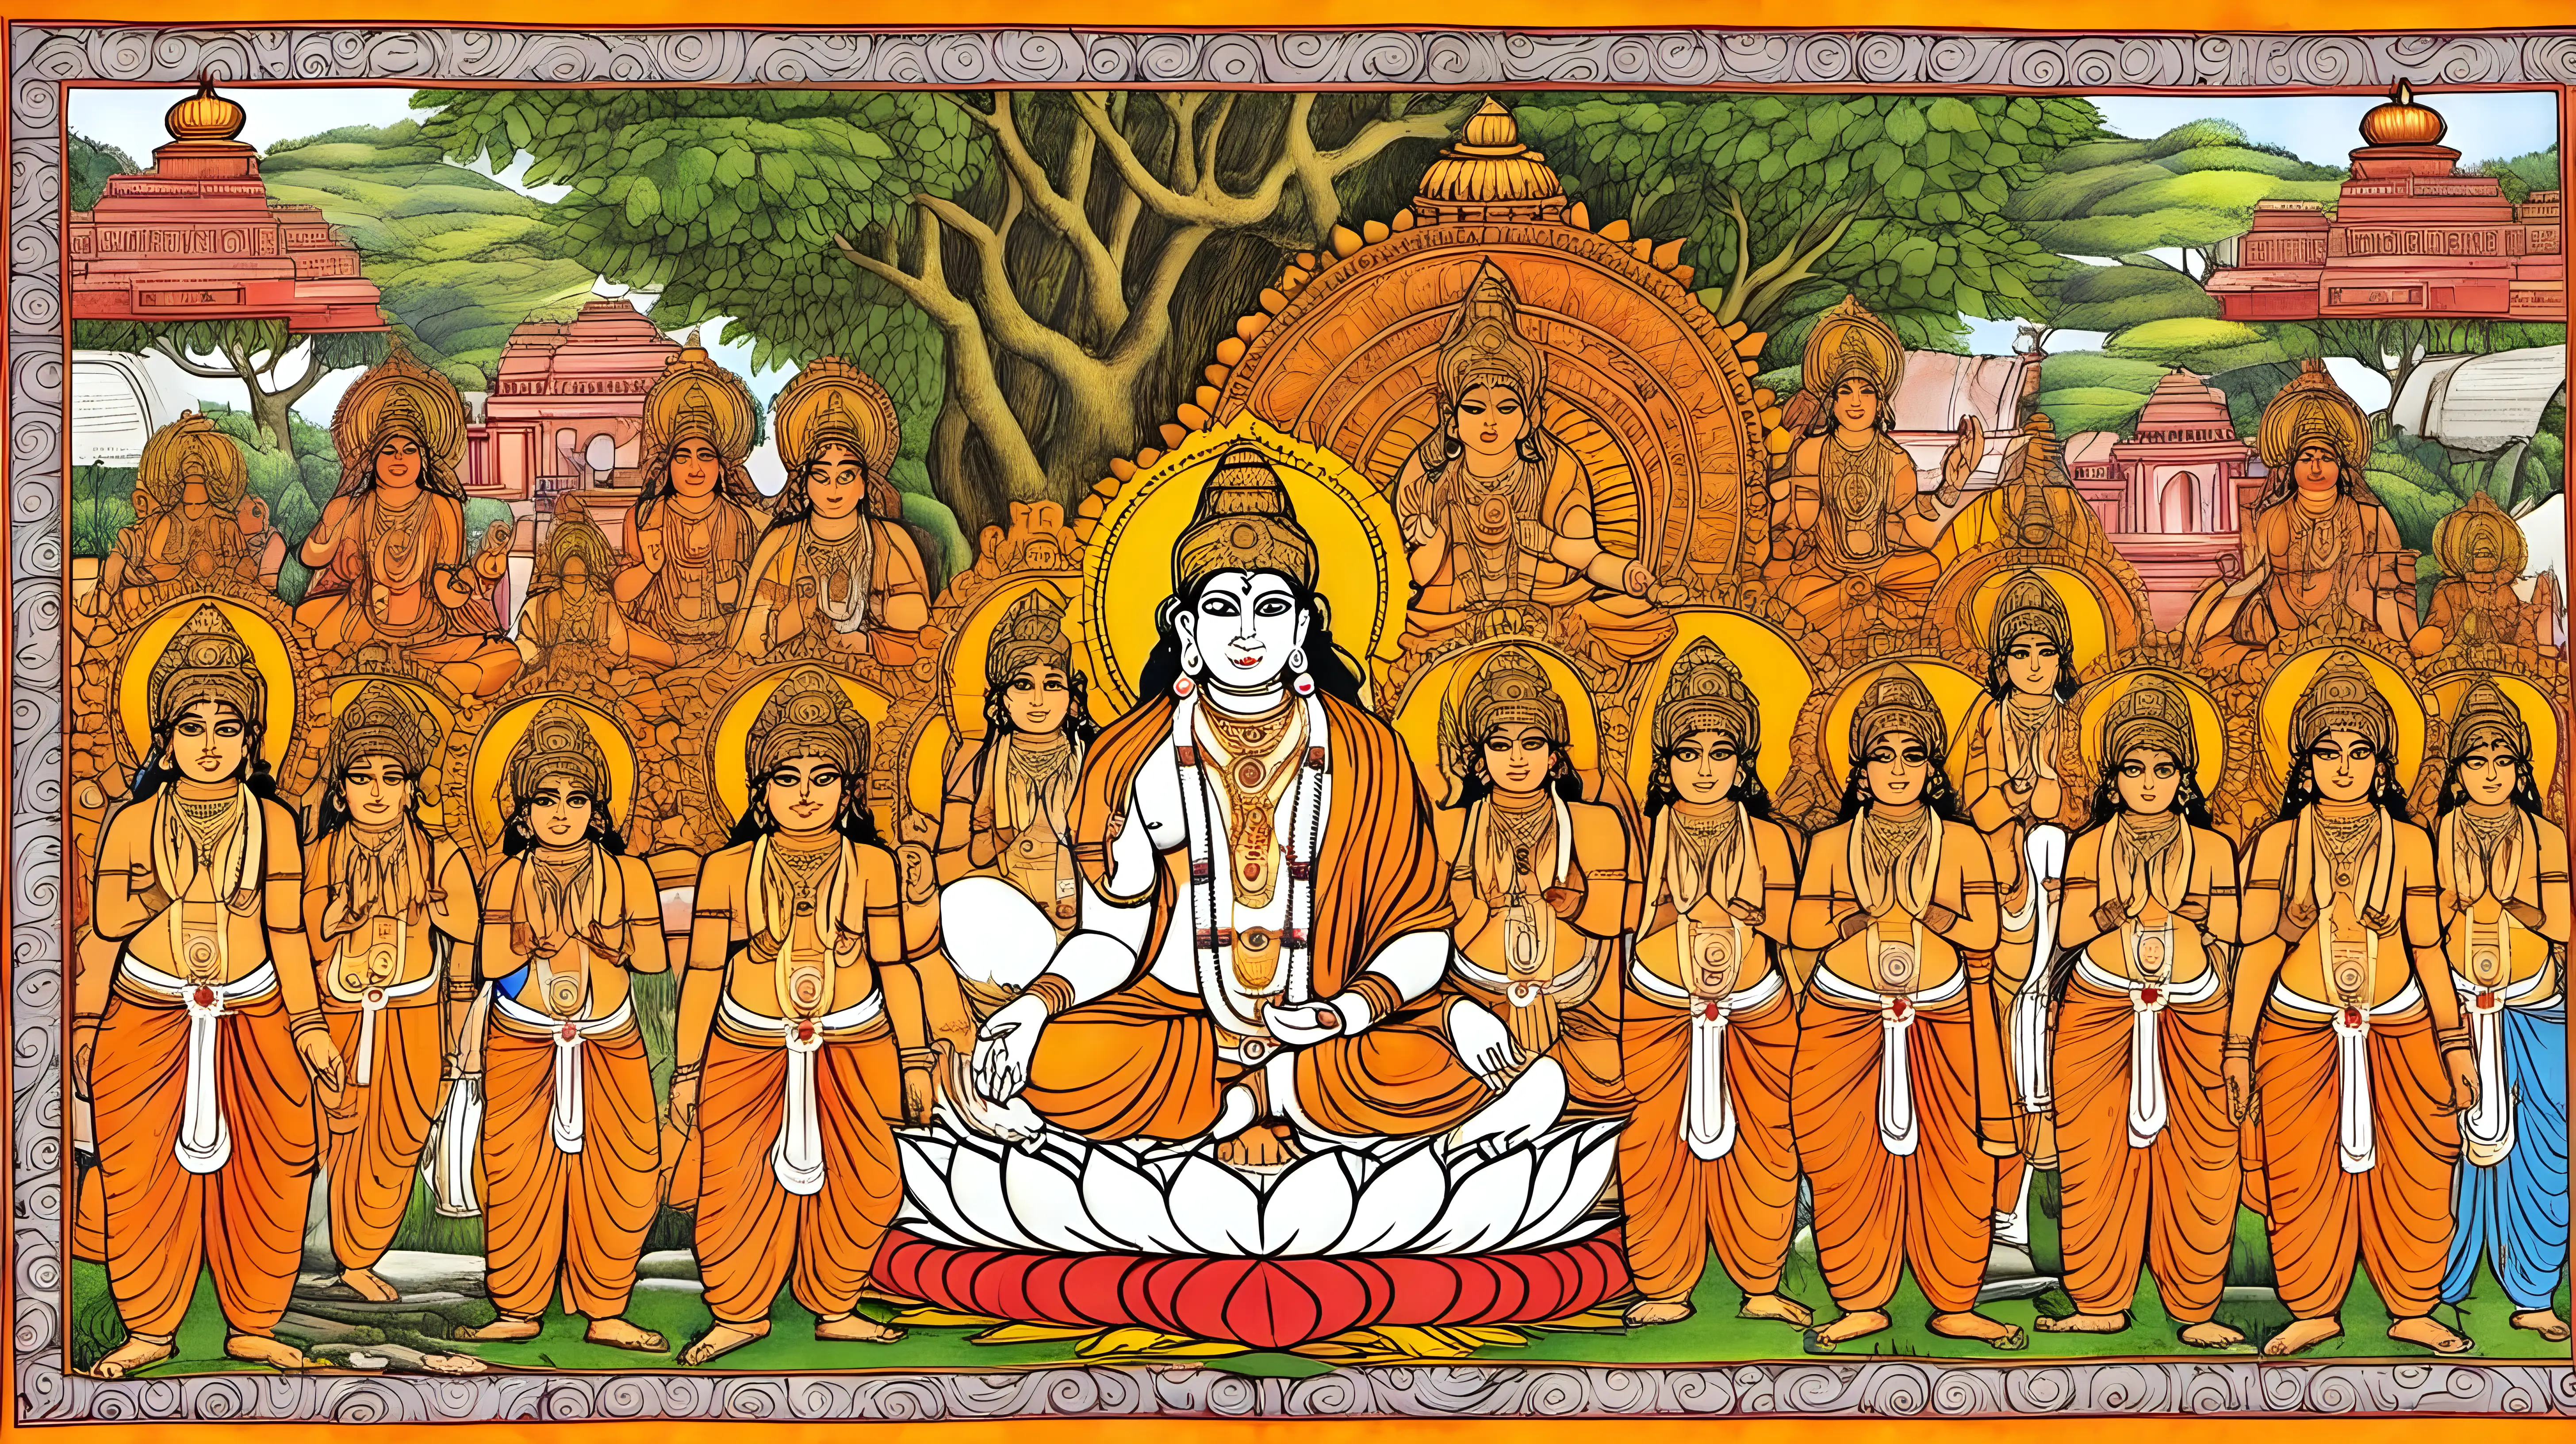 Hinduism Career Activities and Material Resources